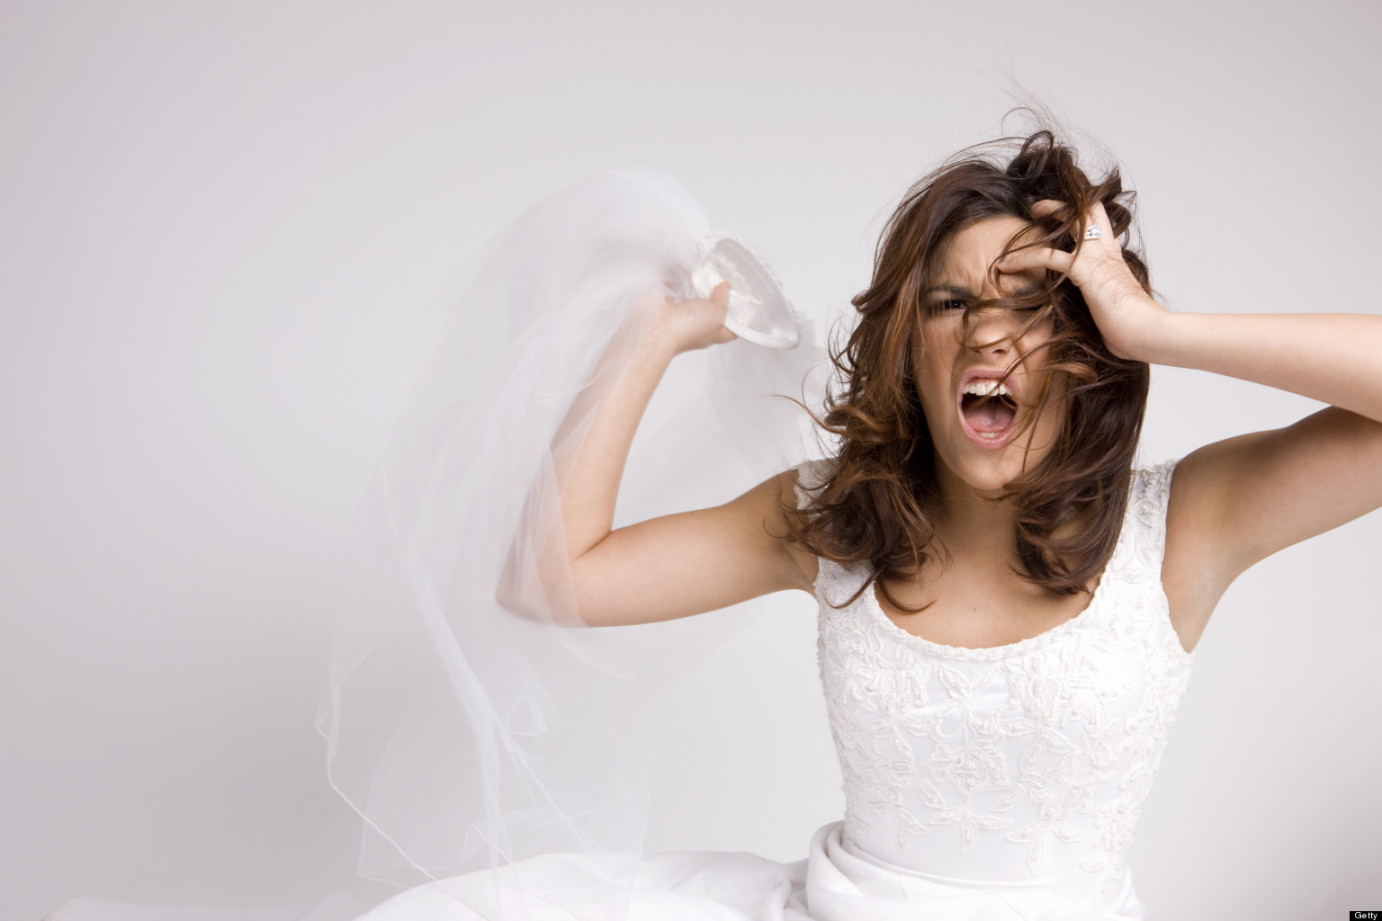 Angry Screaming Bride Throwing Veil on White, Copy Space